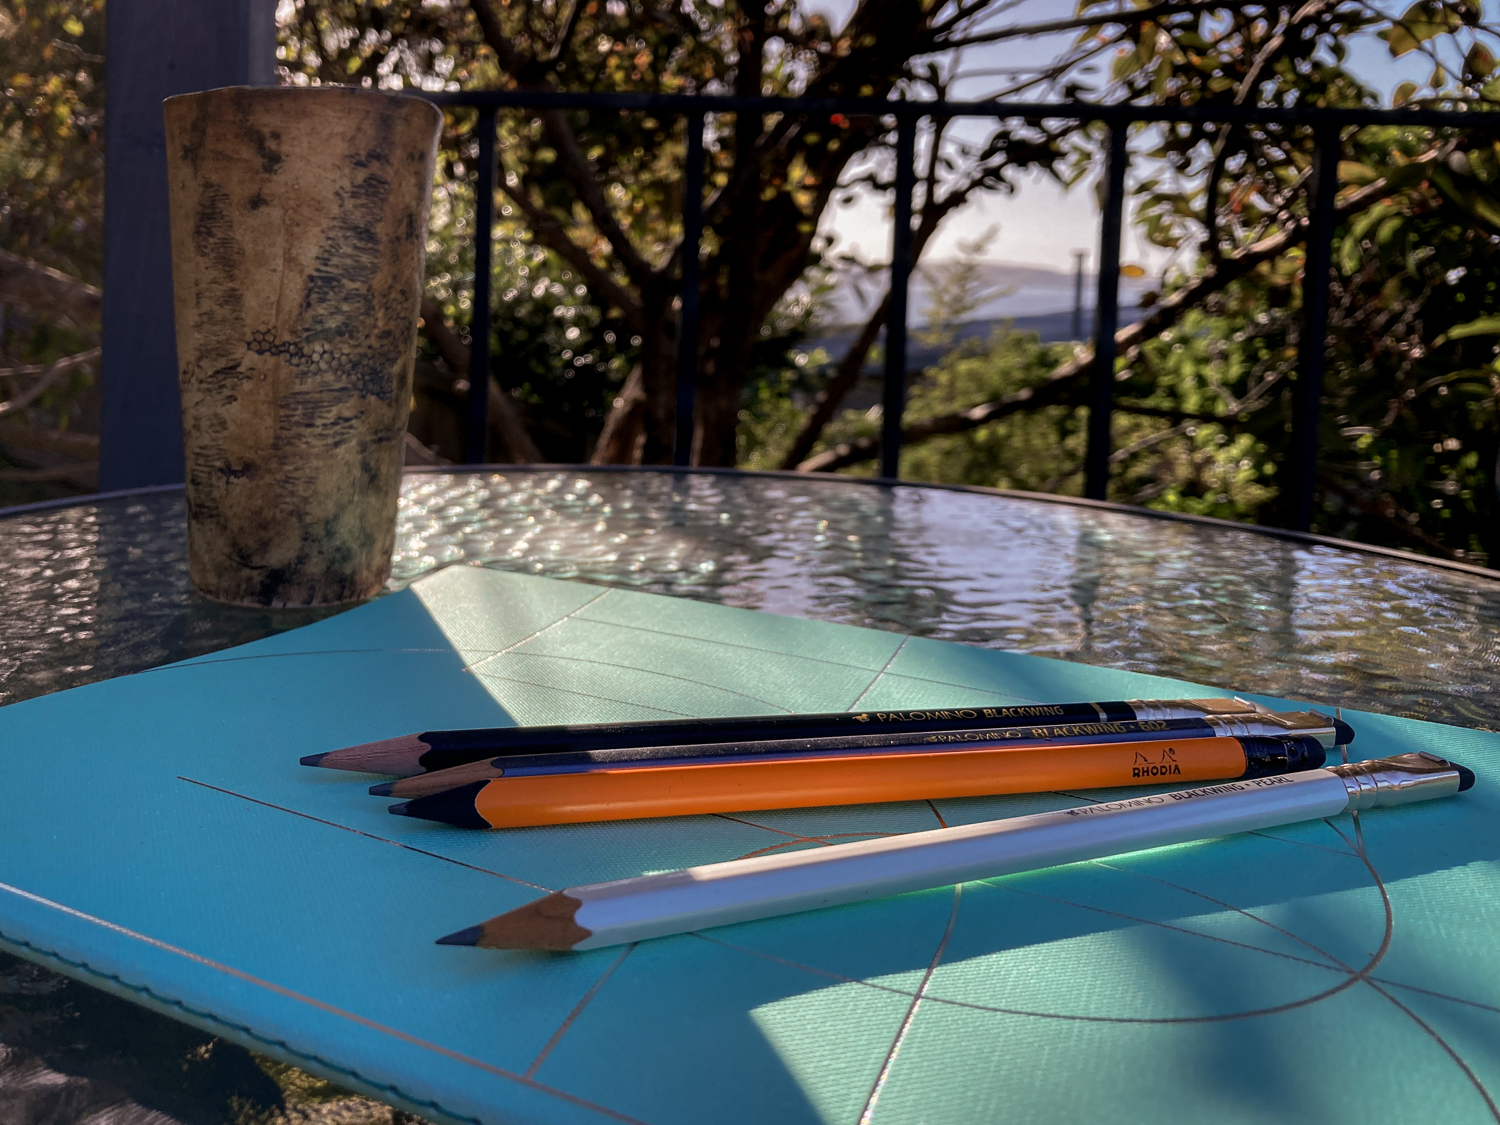 A green notebook on an outside table with four pencils on top of it. There is a coffee cup on the table